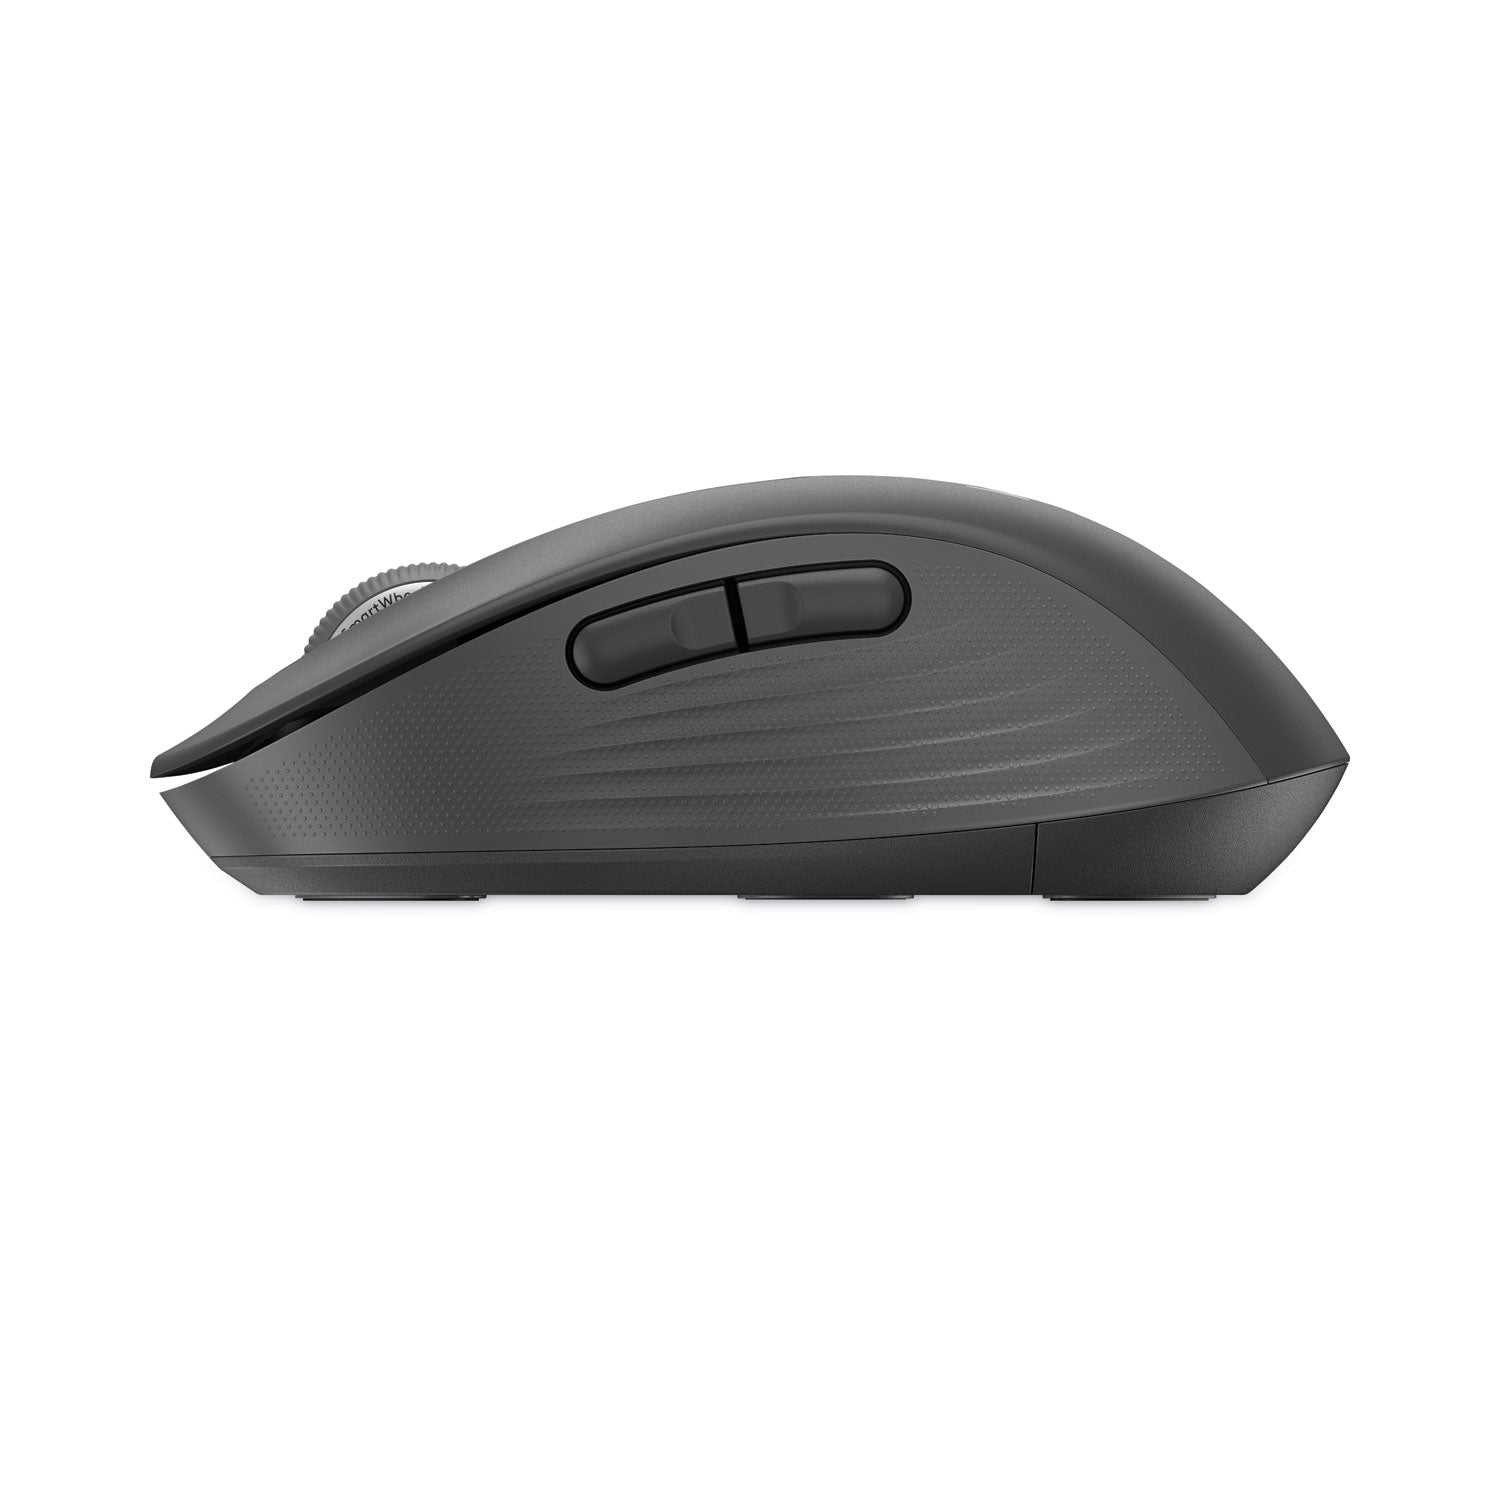 signature-m650-for-business-wireless-mouse-medium-24-ghz-frequency-33-ft-wireless-range-right-hand-use-graphite_log910006272 - 3